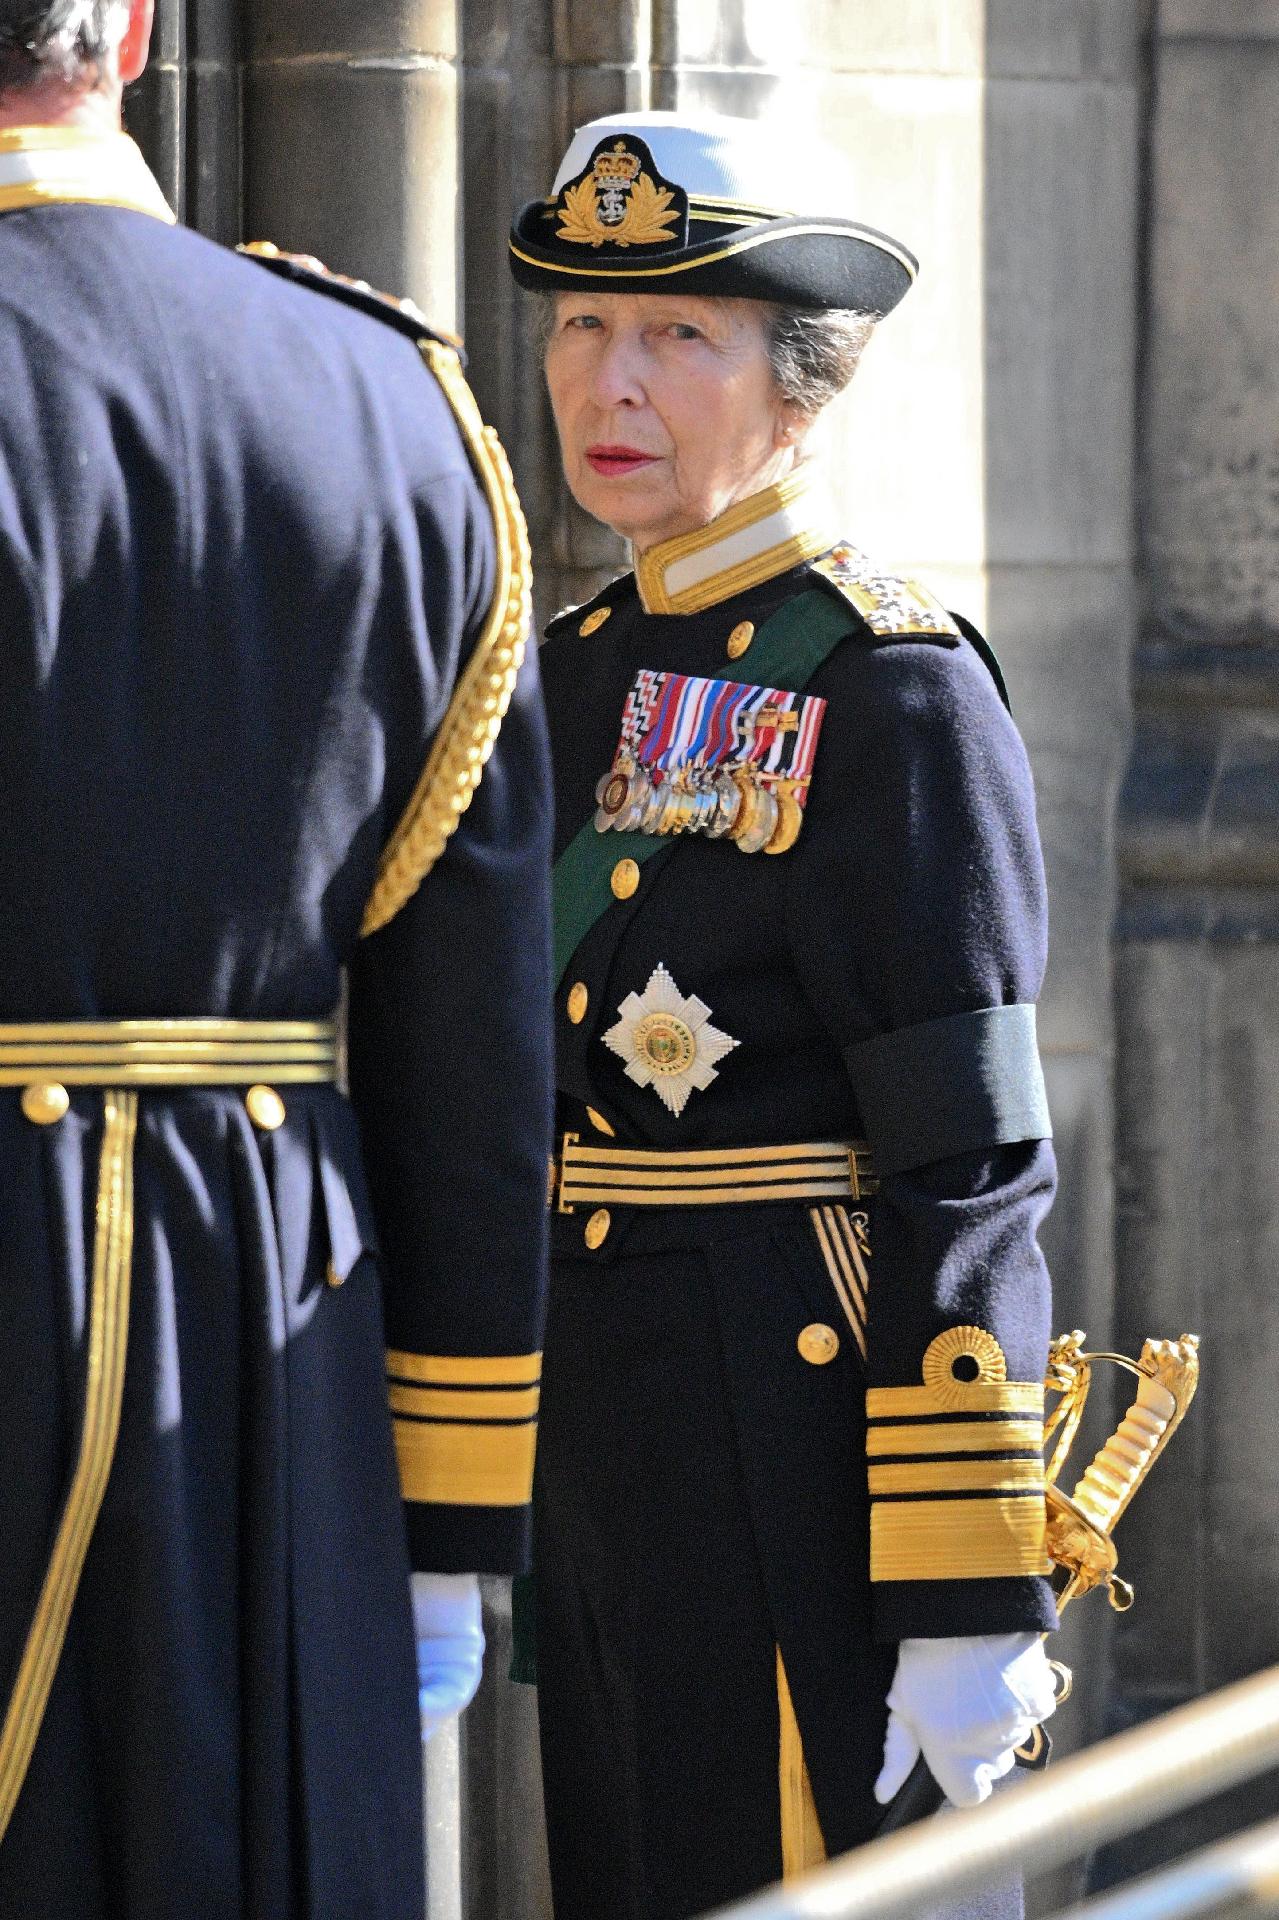 Princess Anne accompanies the funeral procession of Queen Elizabeth II - Photo by Samir Hussain / WireImage